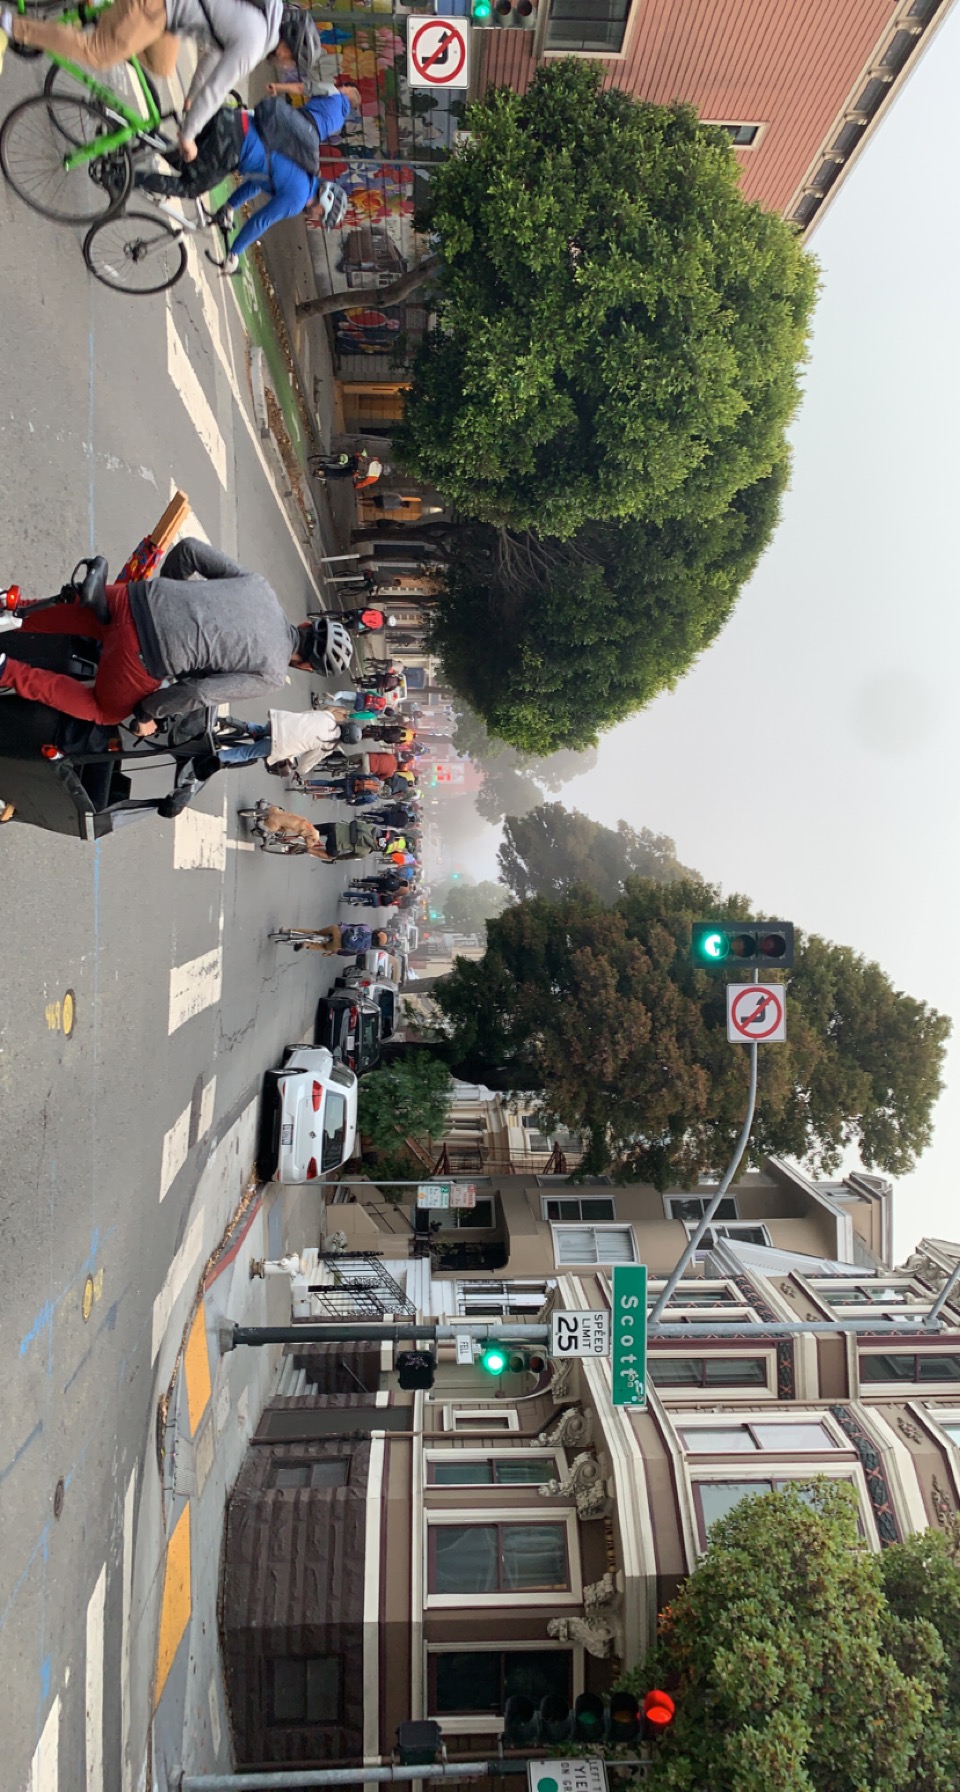 Dozens of bikes taking over the width of Fell at Scott St, with fog in the distance obscuring the view past Divisadero